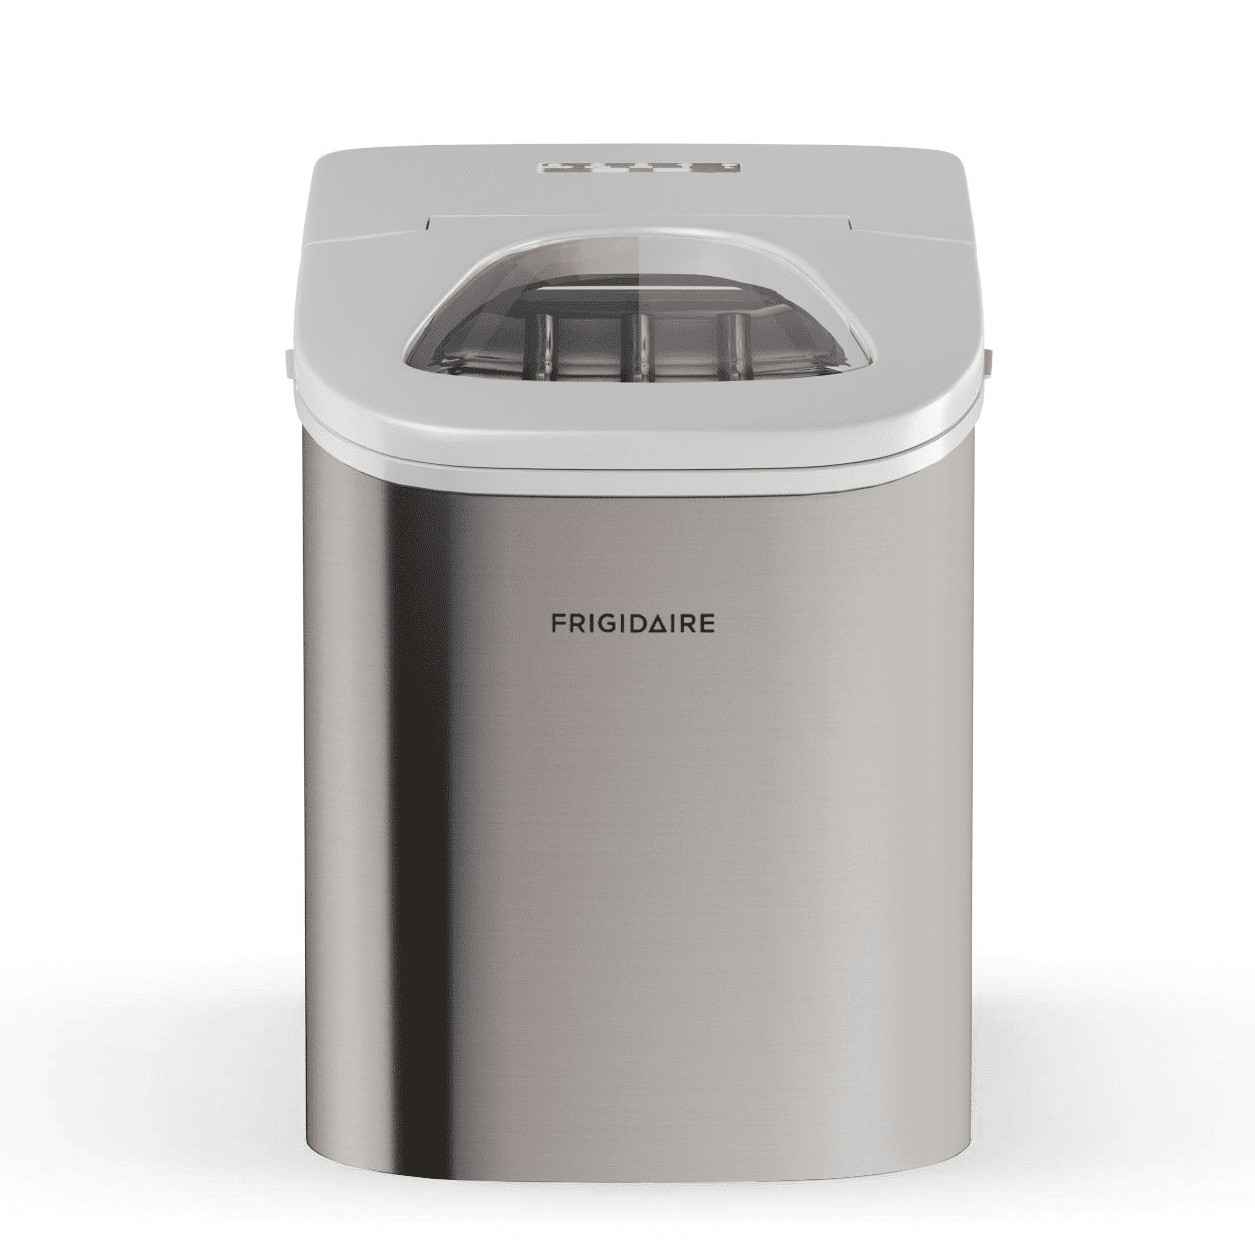 Frigidaire EFIC189 Compact Ice Maker - Silver for sale online